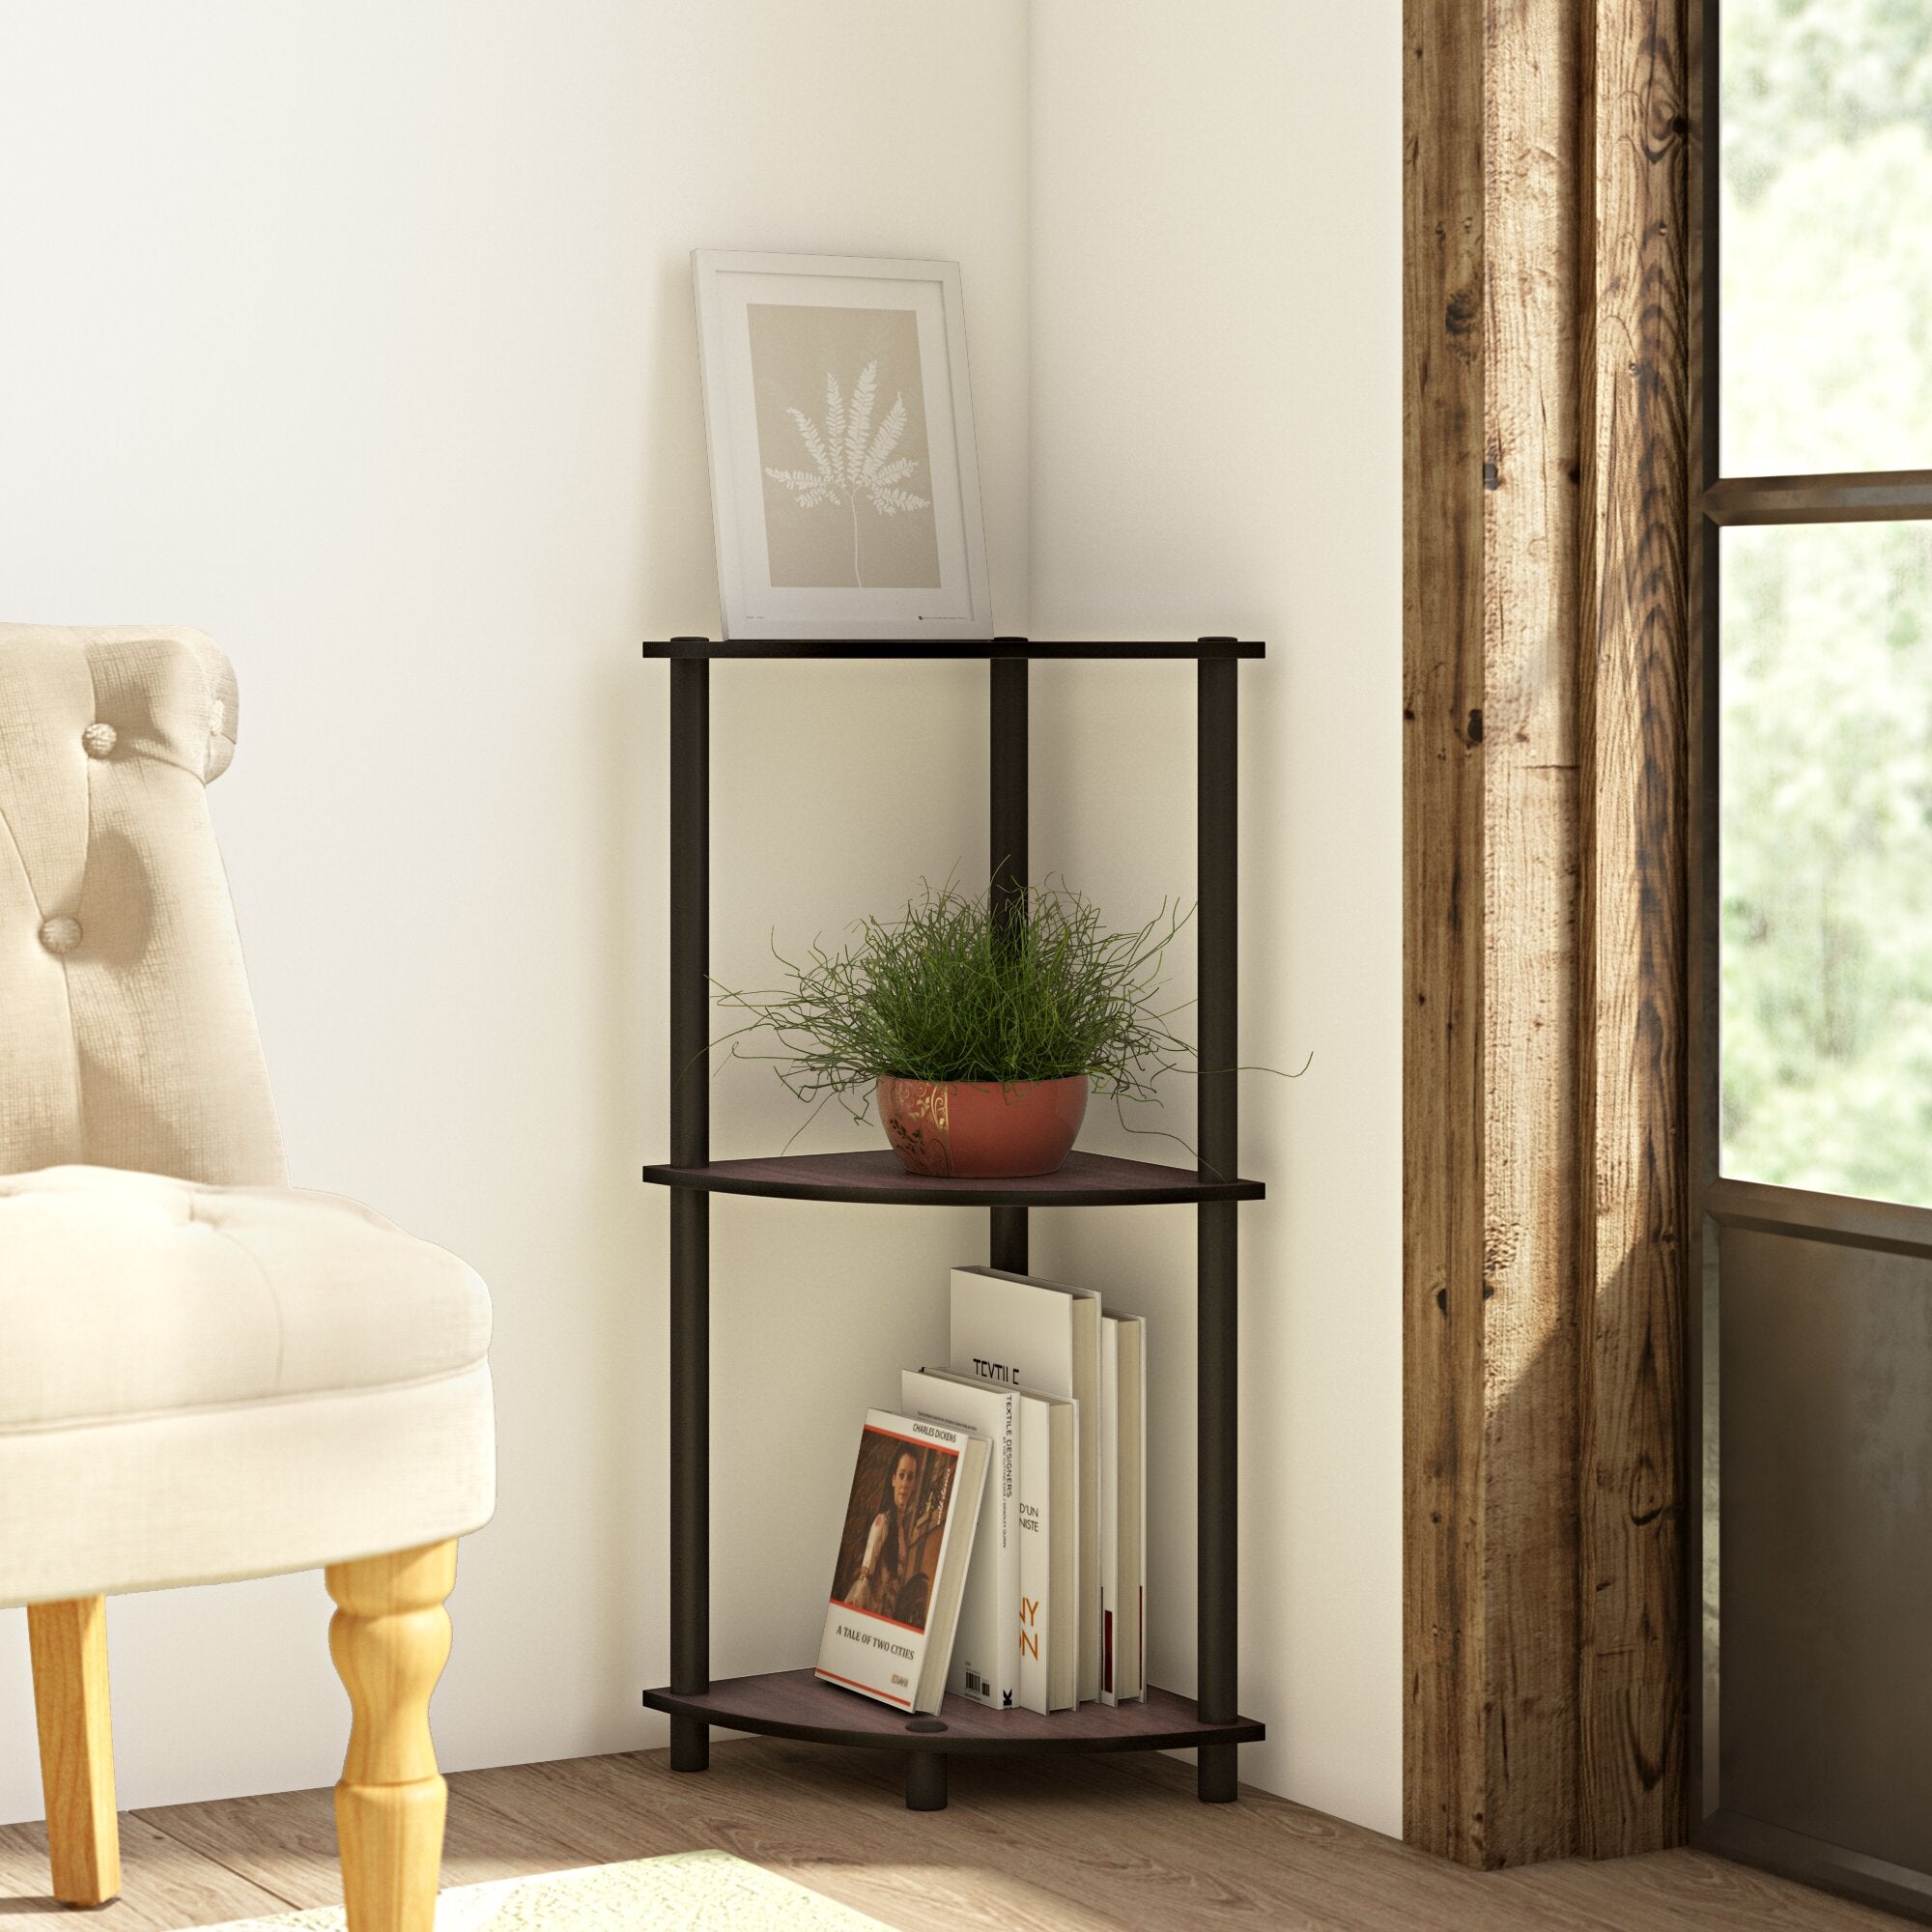 Black and brown three-tier corner shelf with plant and books on display next to tufted chair and window